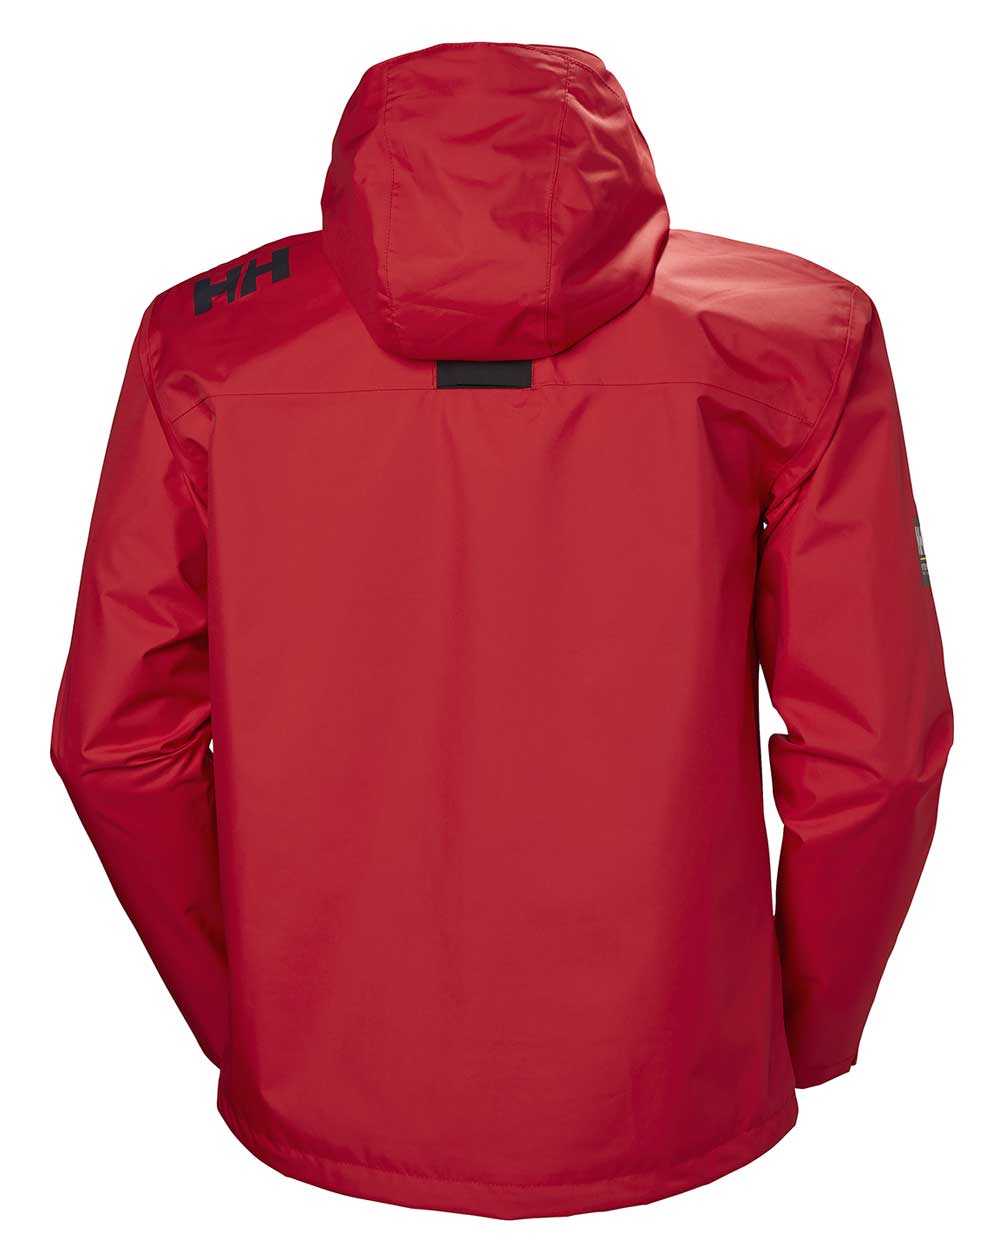 Helly Hansen Crew Hooded Jacket In Red 